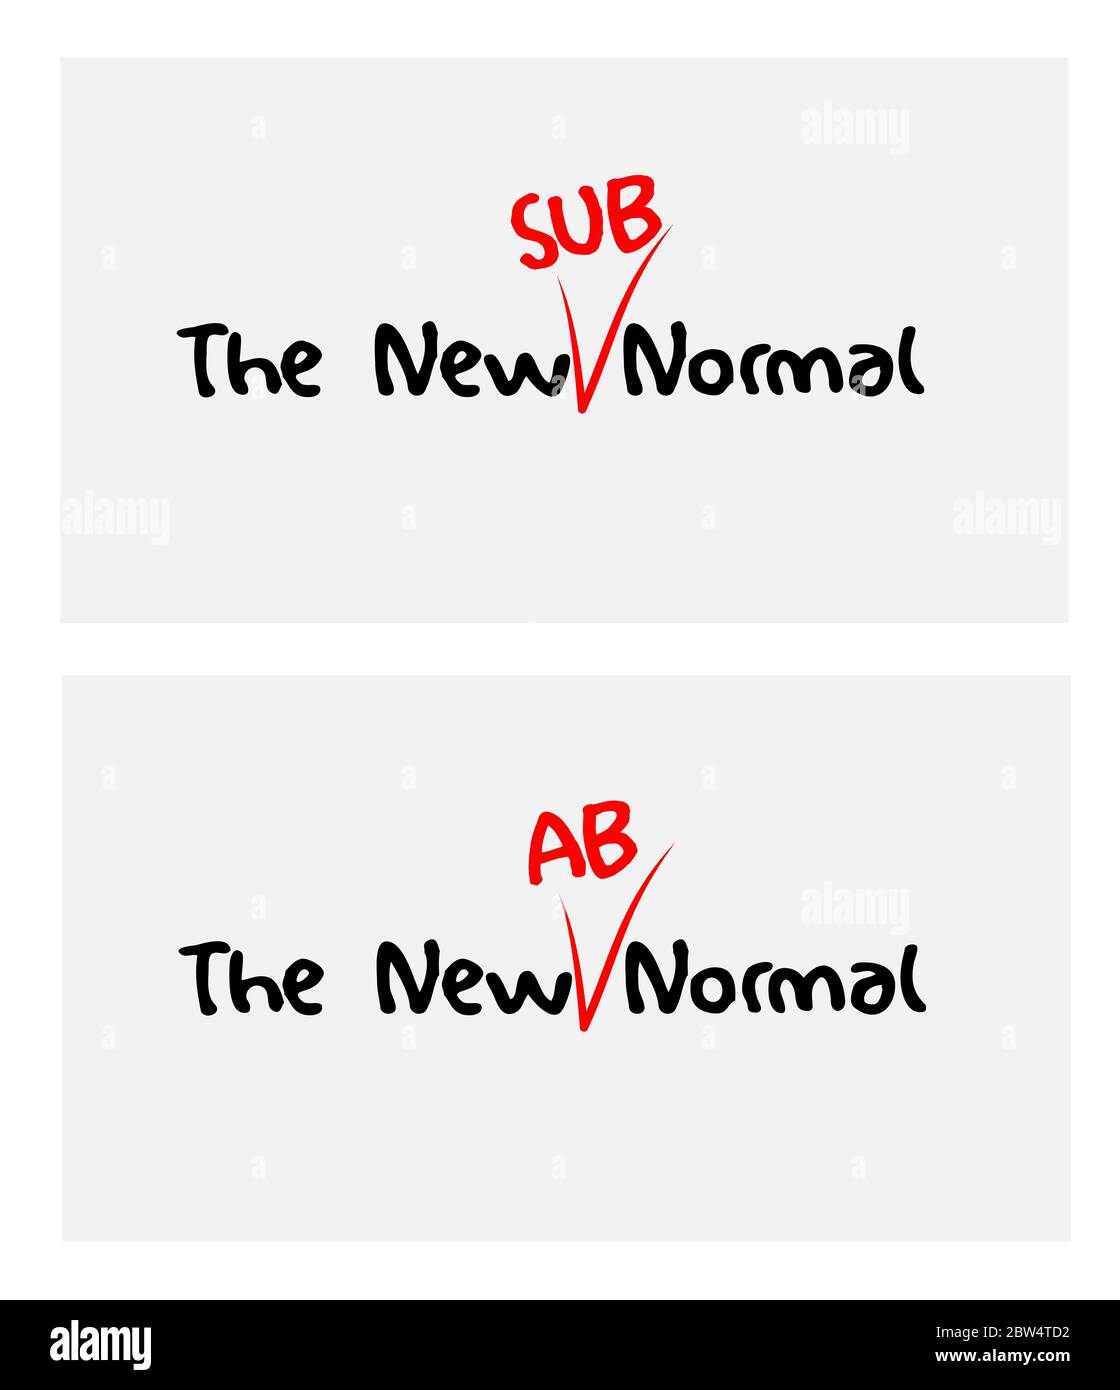 The New Normal phrase slogan, red dash SUB and AB prefixes as protest to social distancing changes Stock Photo